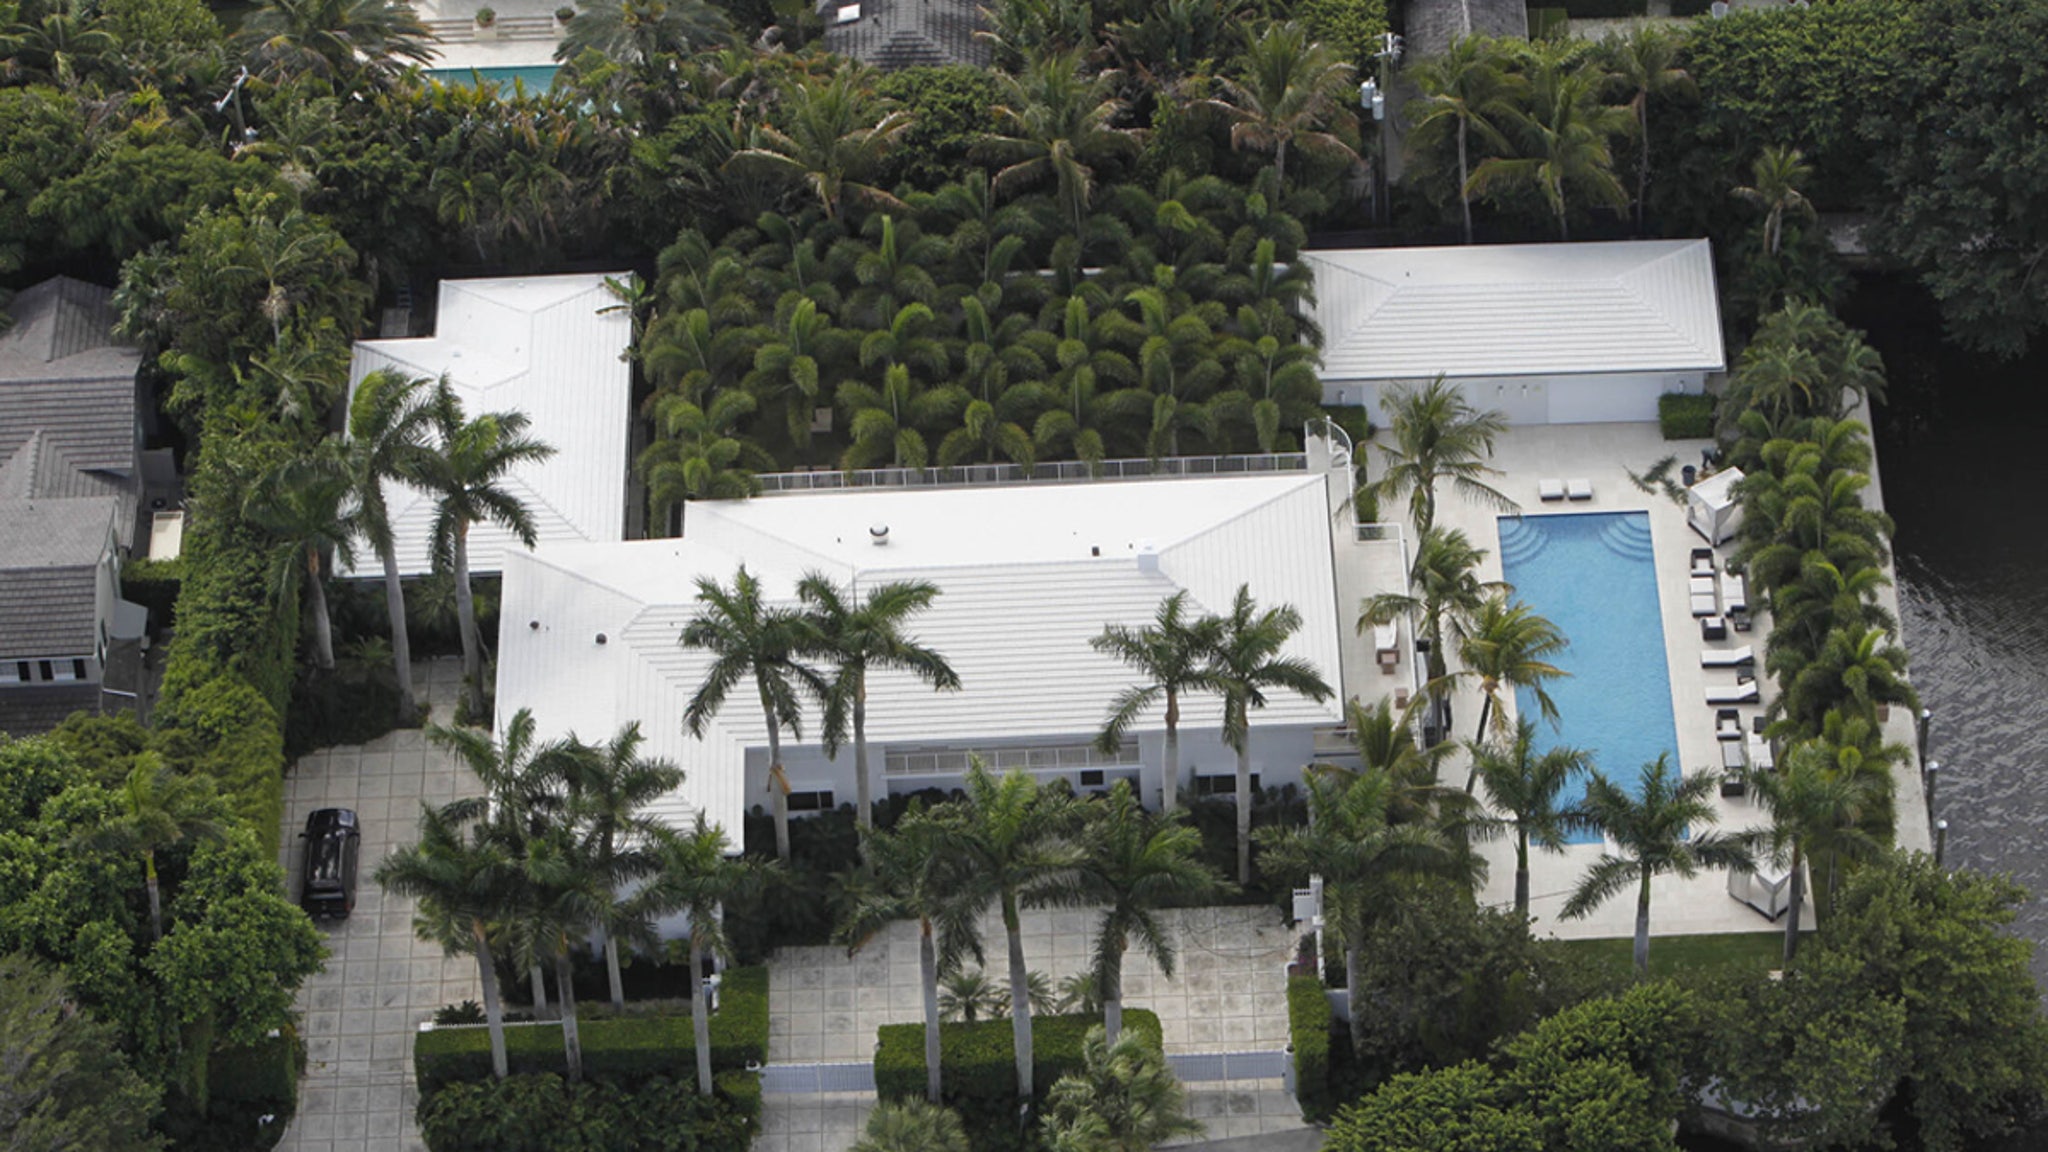 Jeffrey Epstein S Infamous Palm Beach House For Sale At 22m